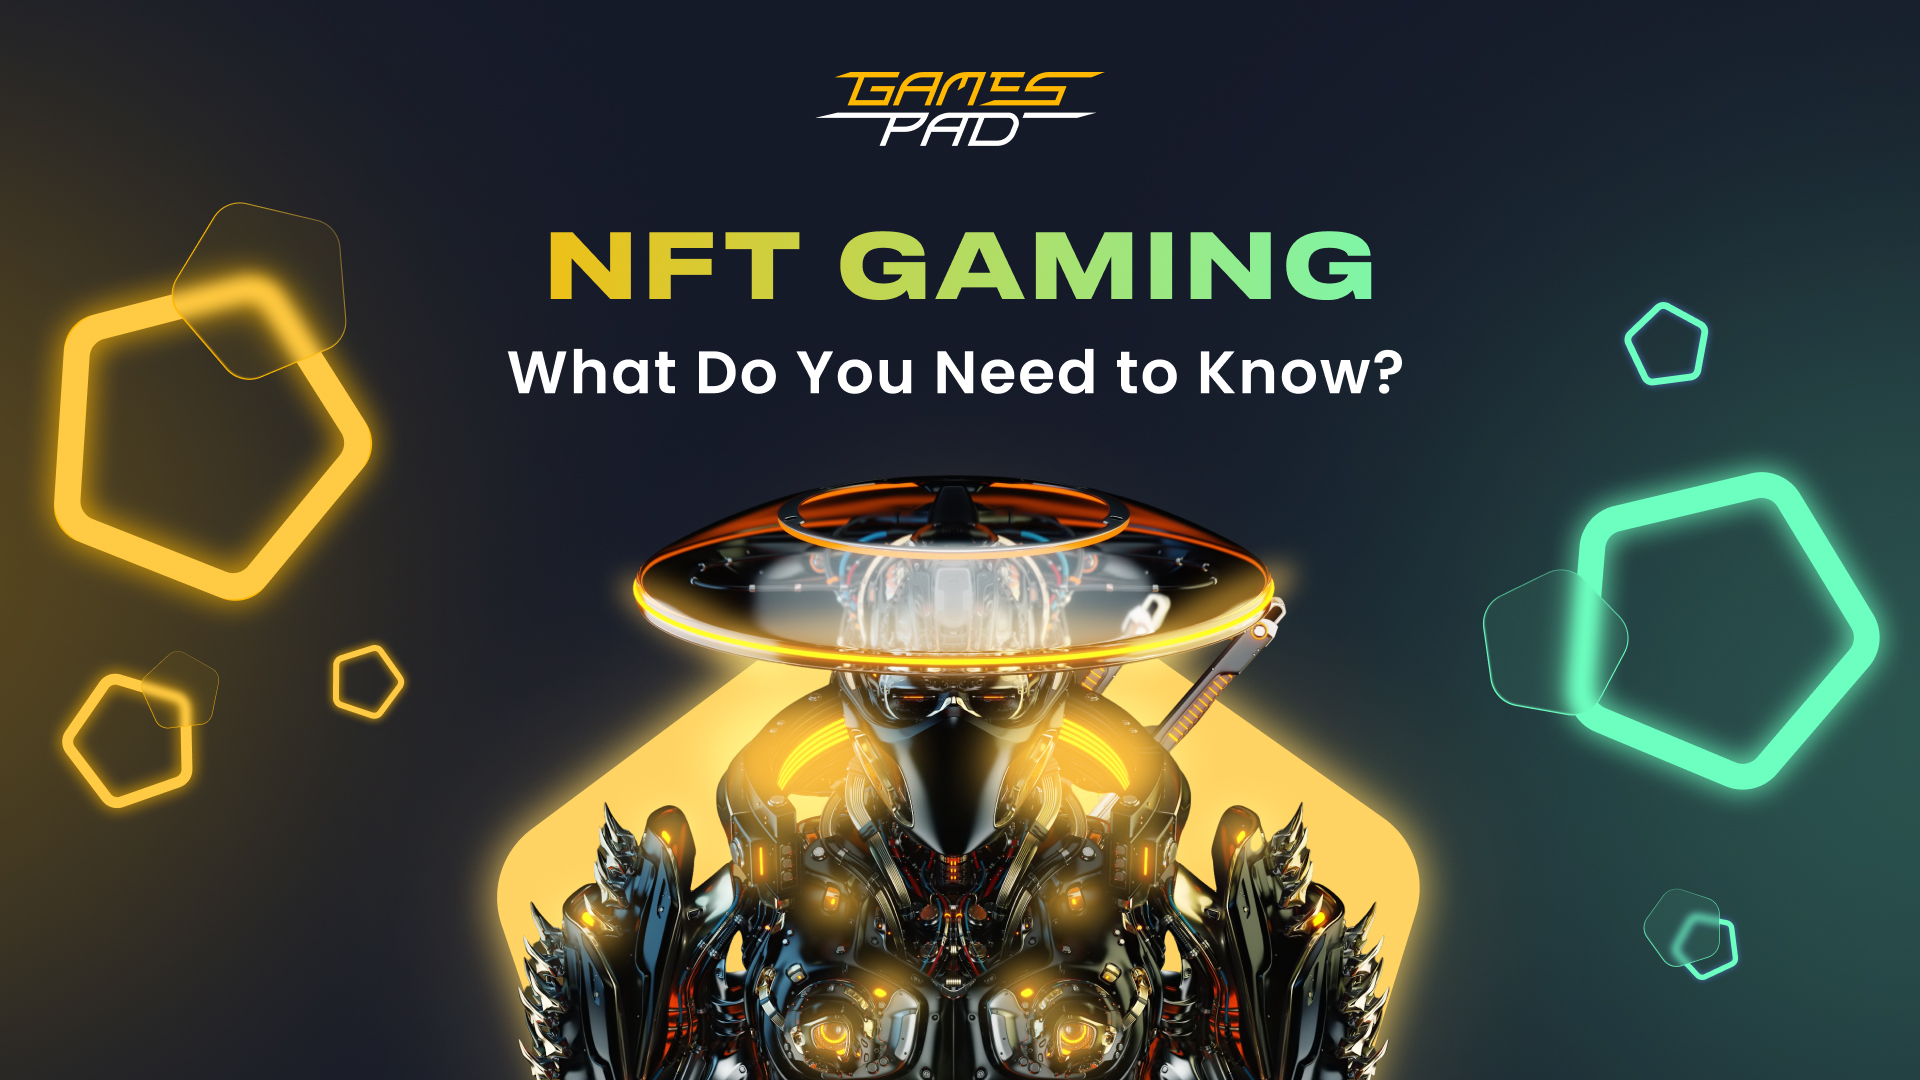 GamesPad: NFT Gaming. What Do You Need to Know? 1